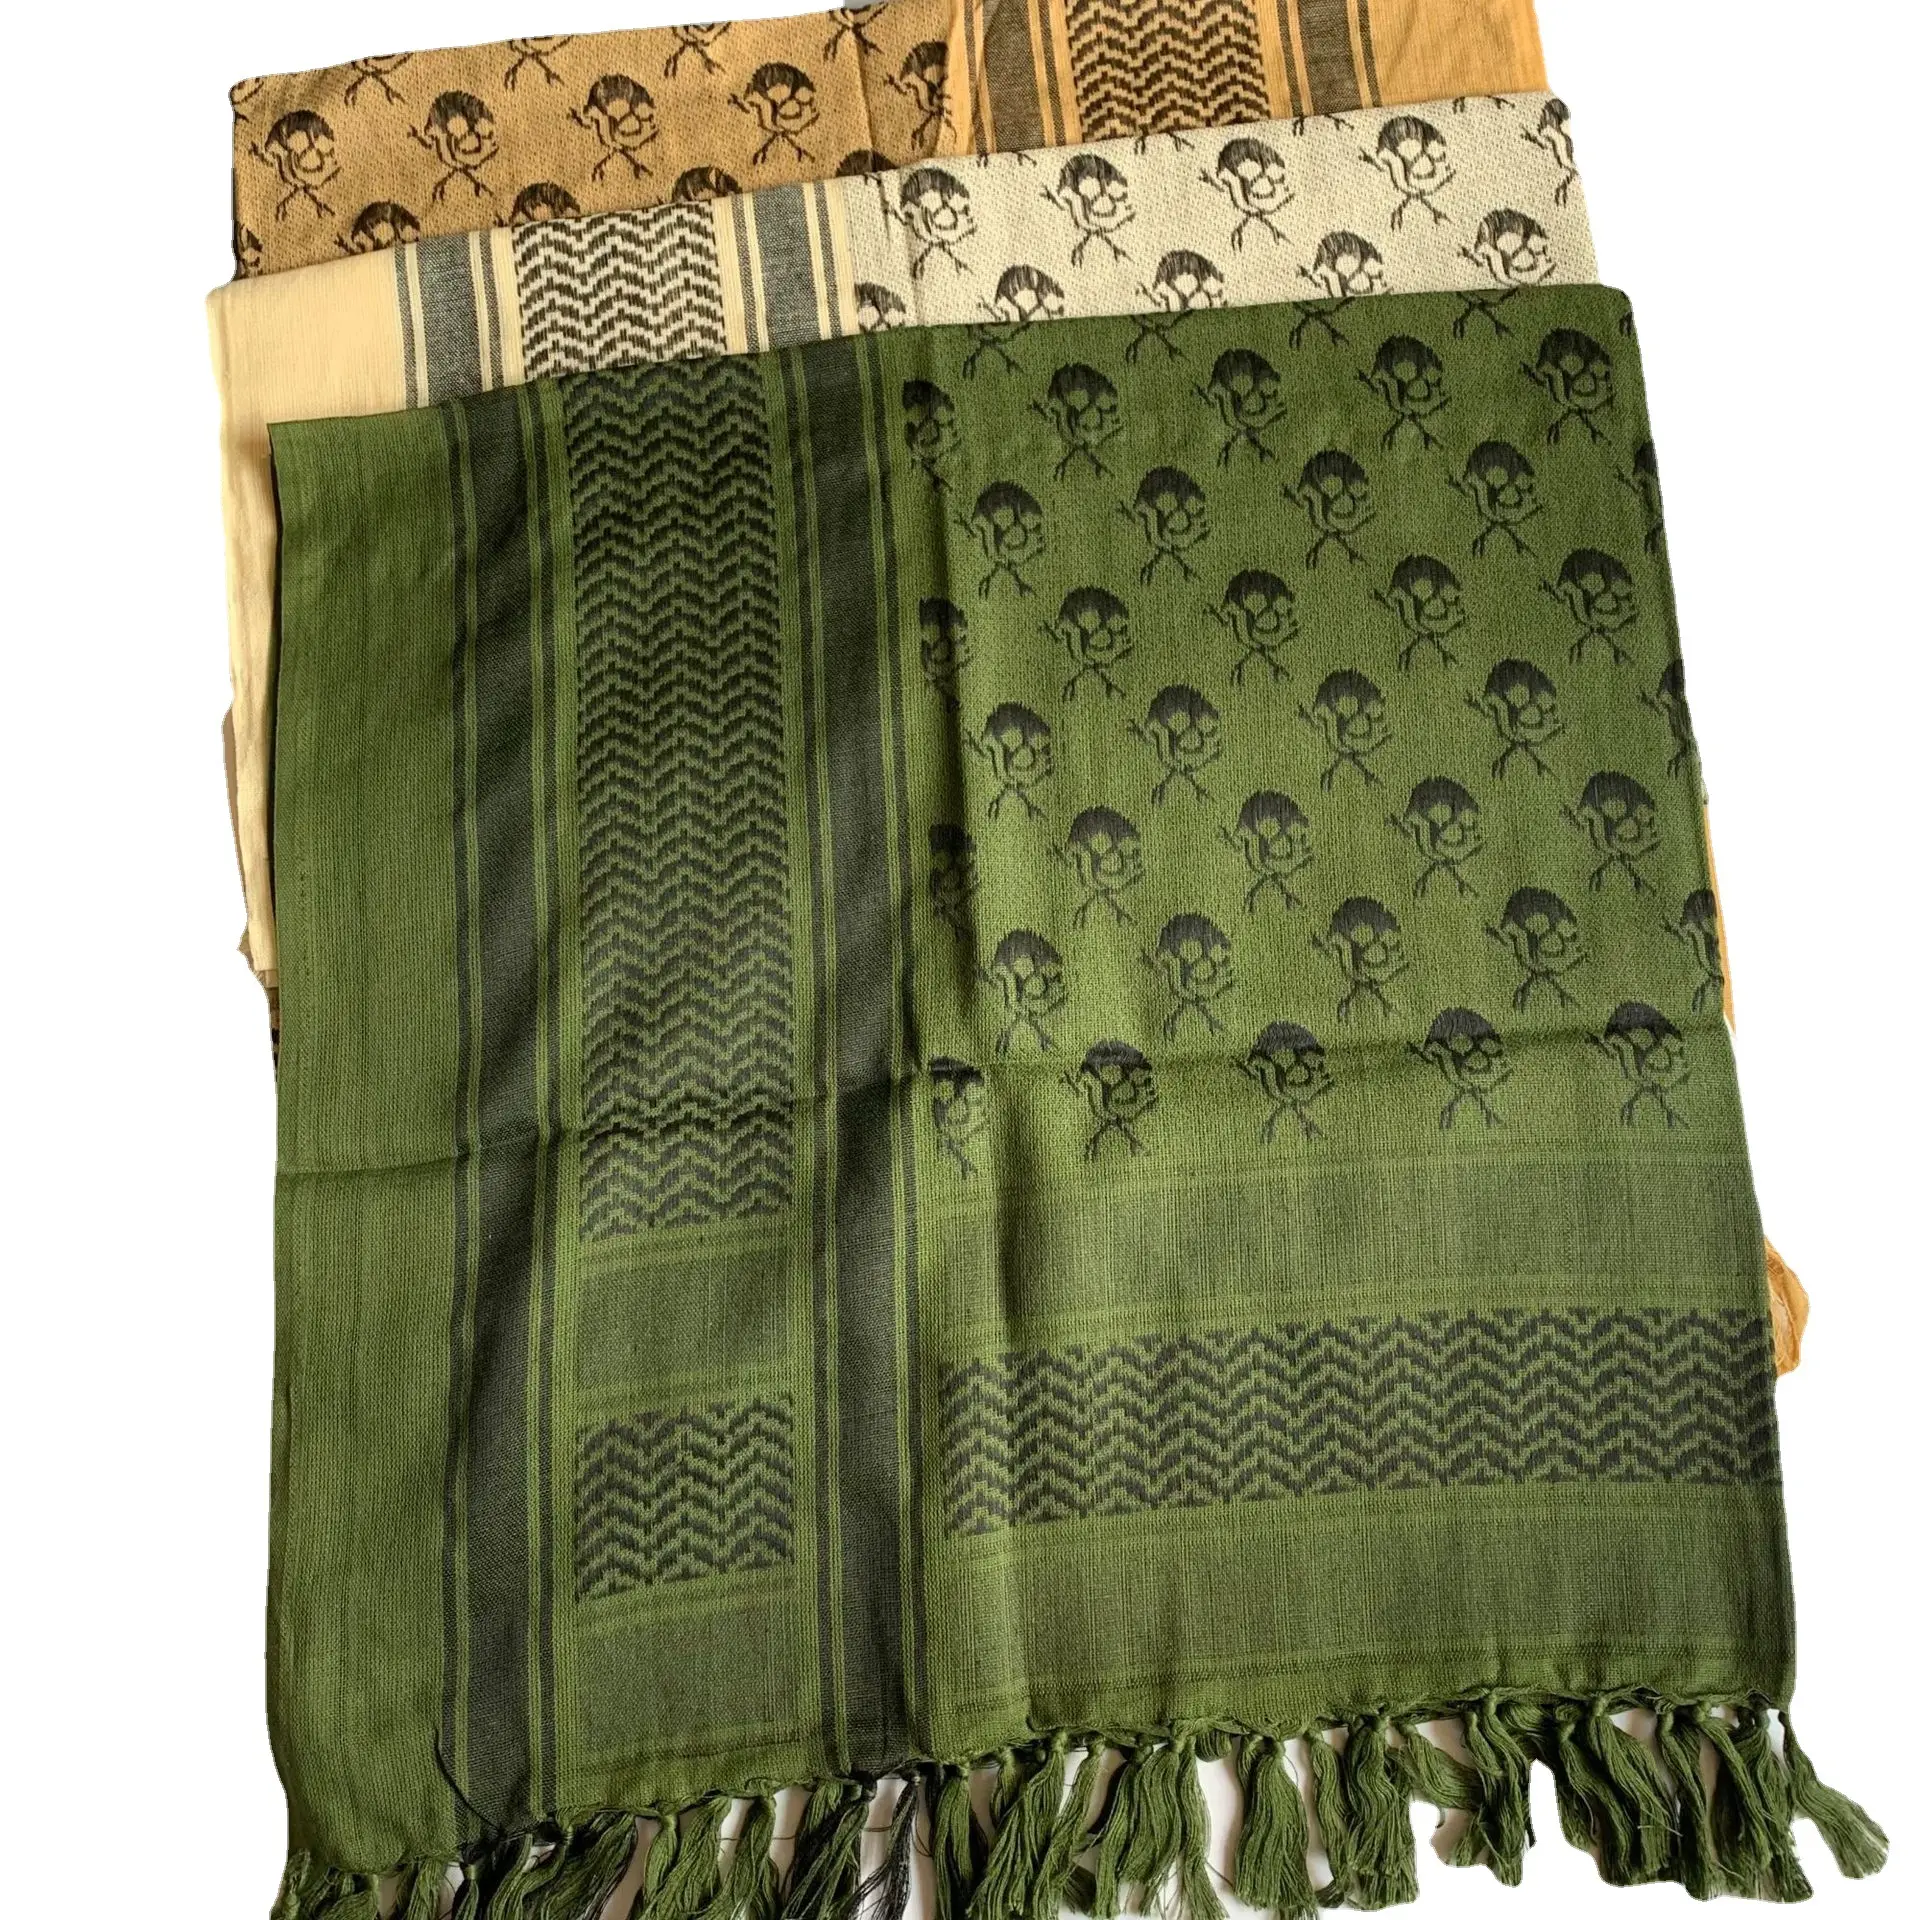 Shemagh Arab Scarf For Men Green Red Cotton Polyester Desert Head Neck Scarf Palestinian Keffiyeh Scarf Arab Shemagh